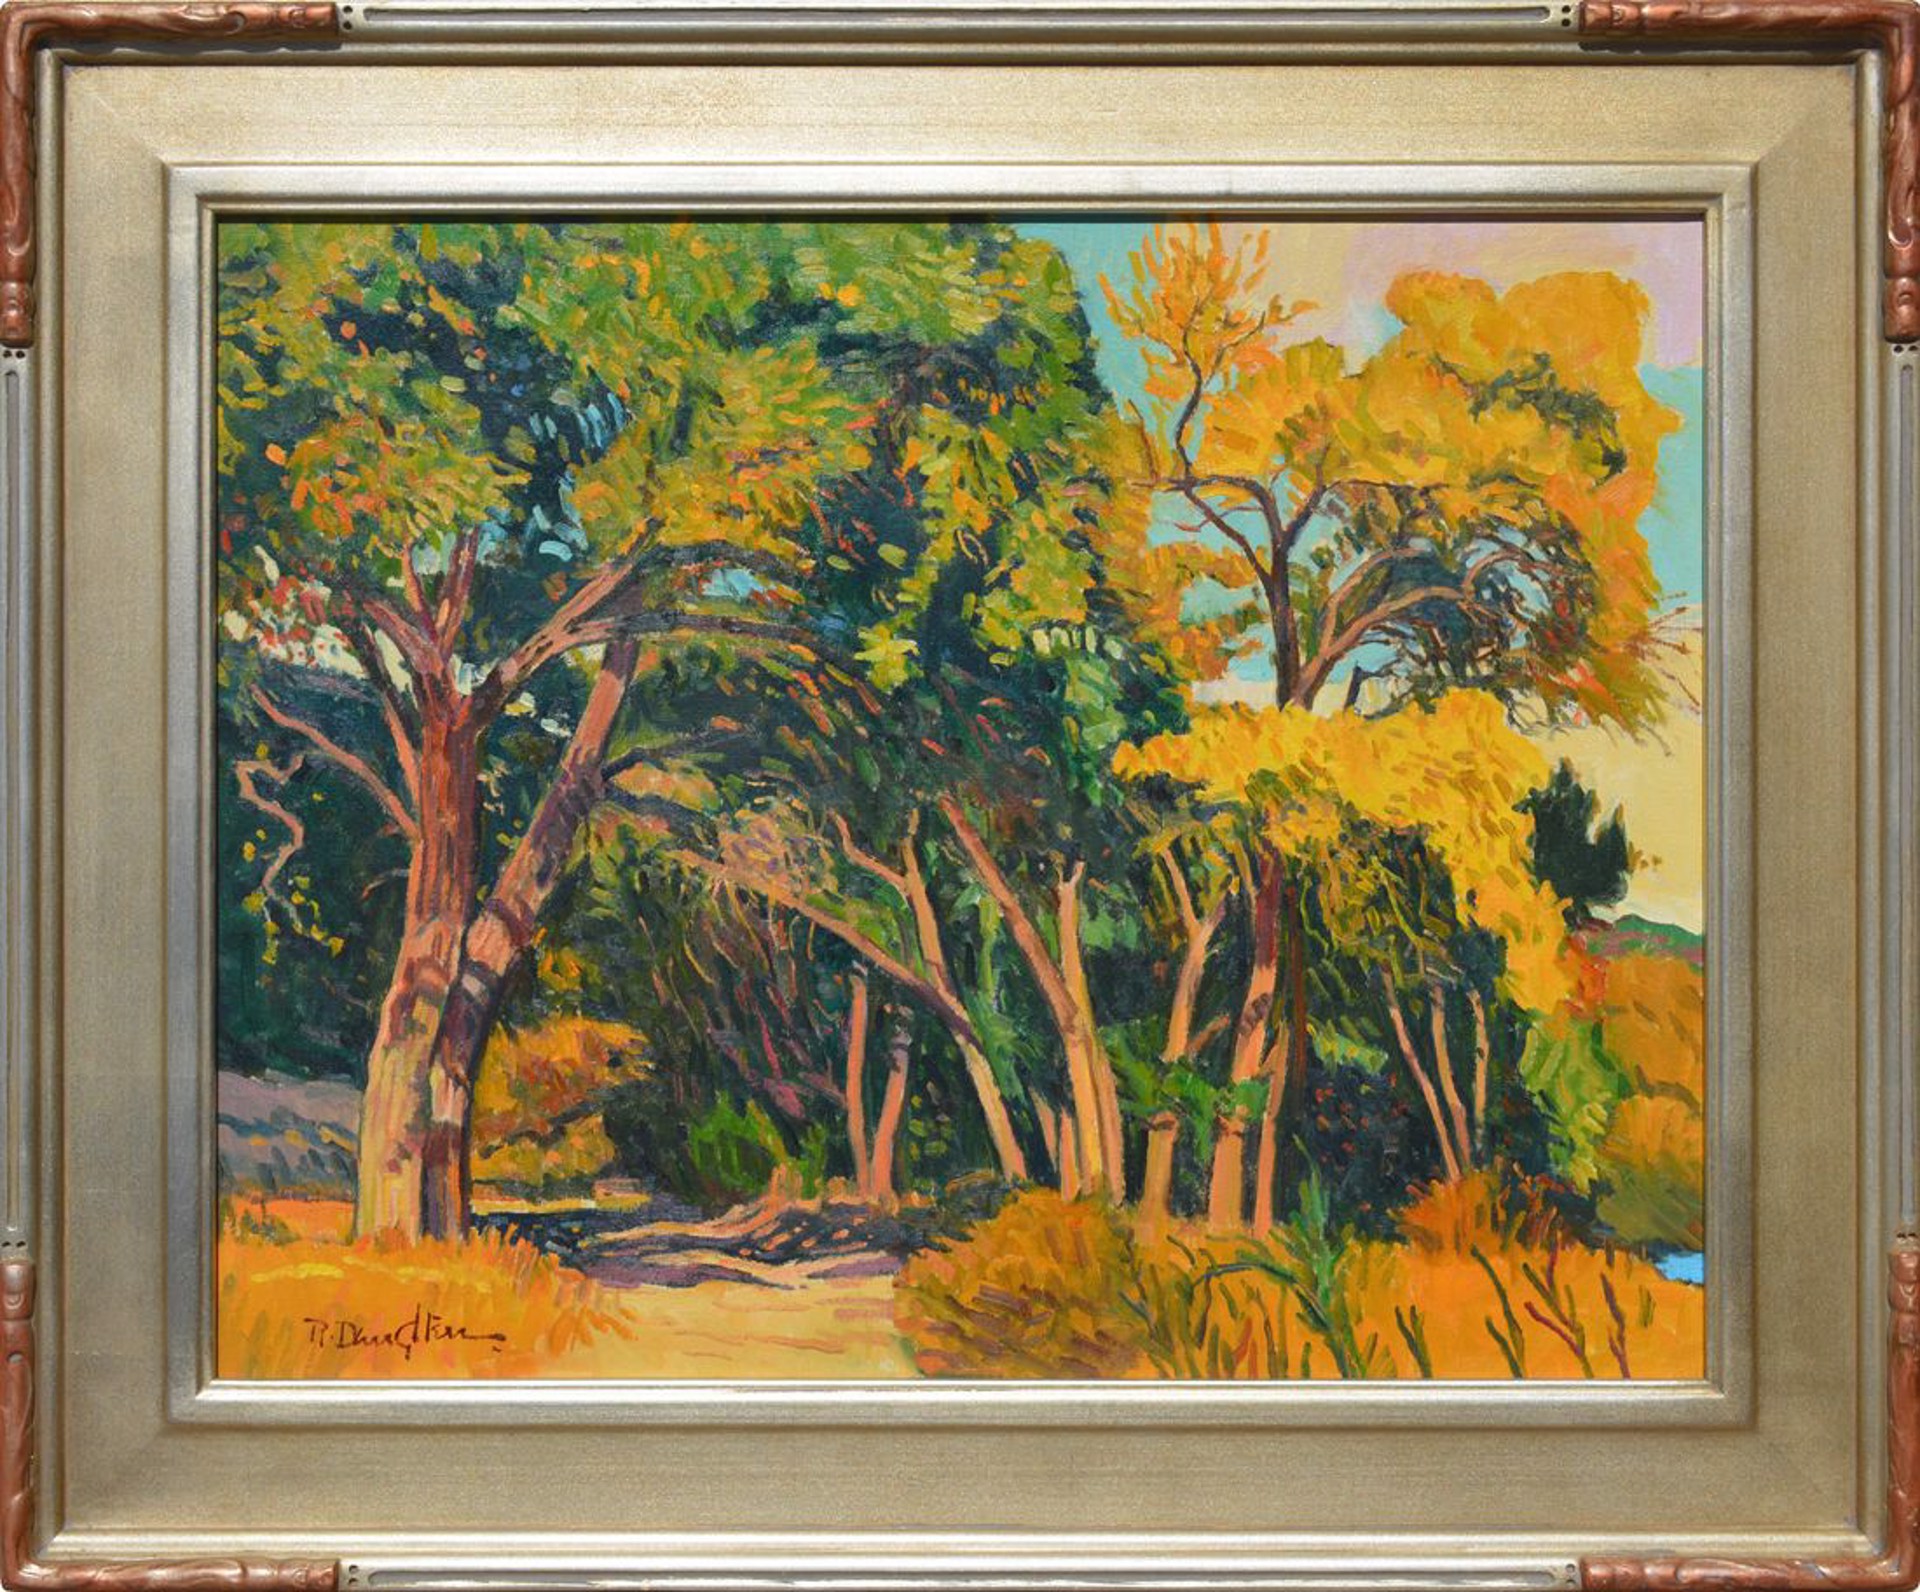 Cottonwood River Path by Robert Daughters (1929-2013)